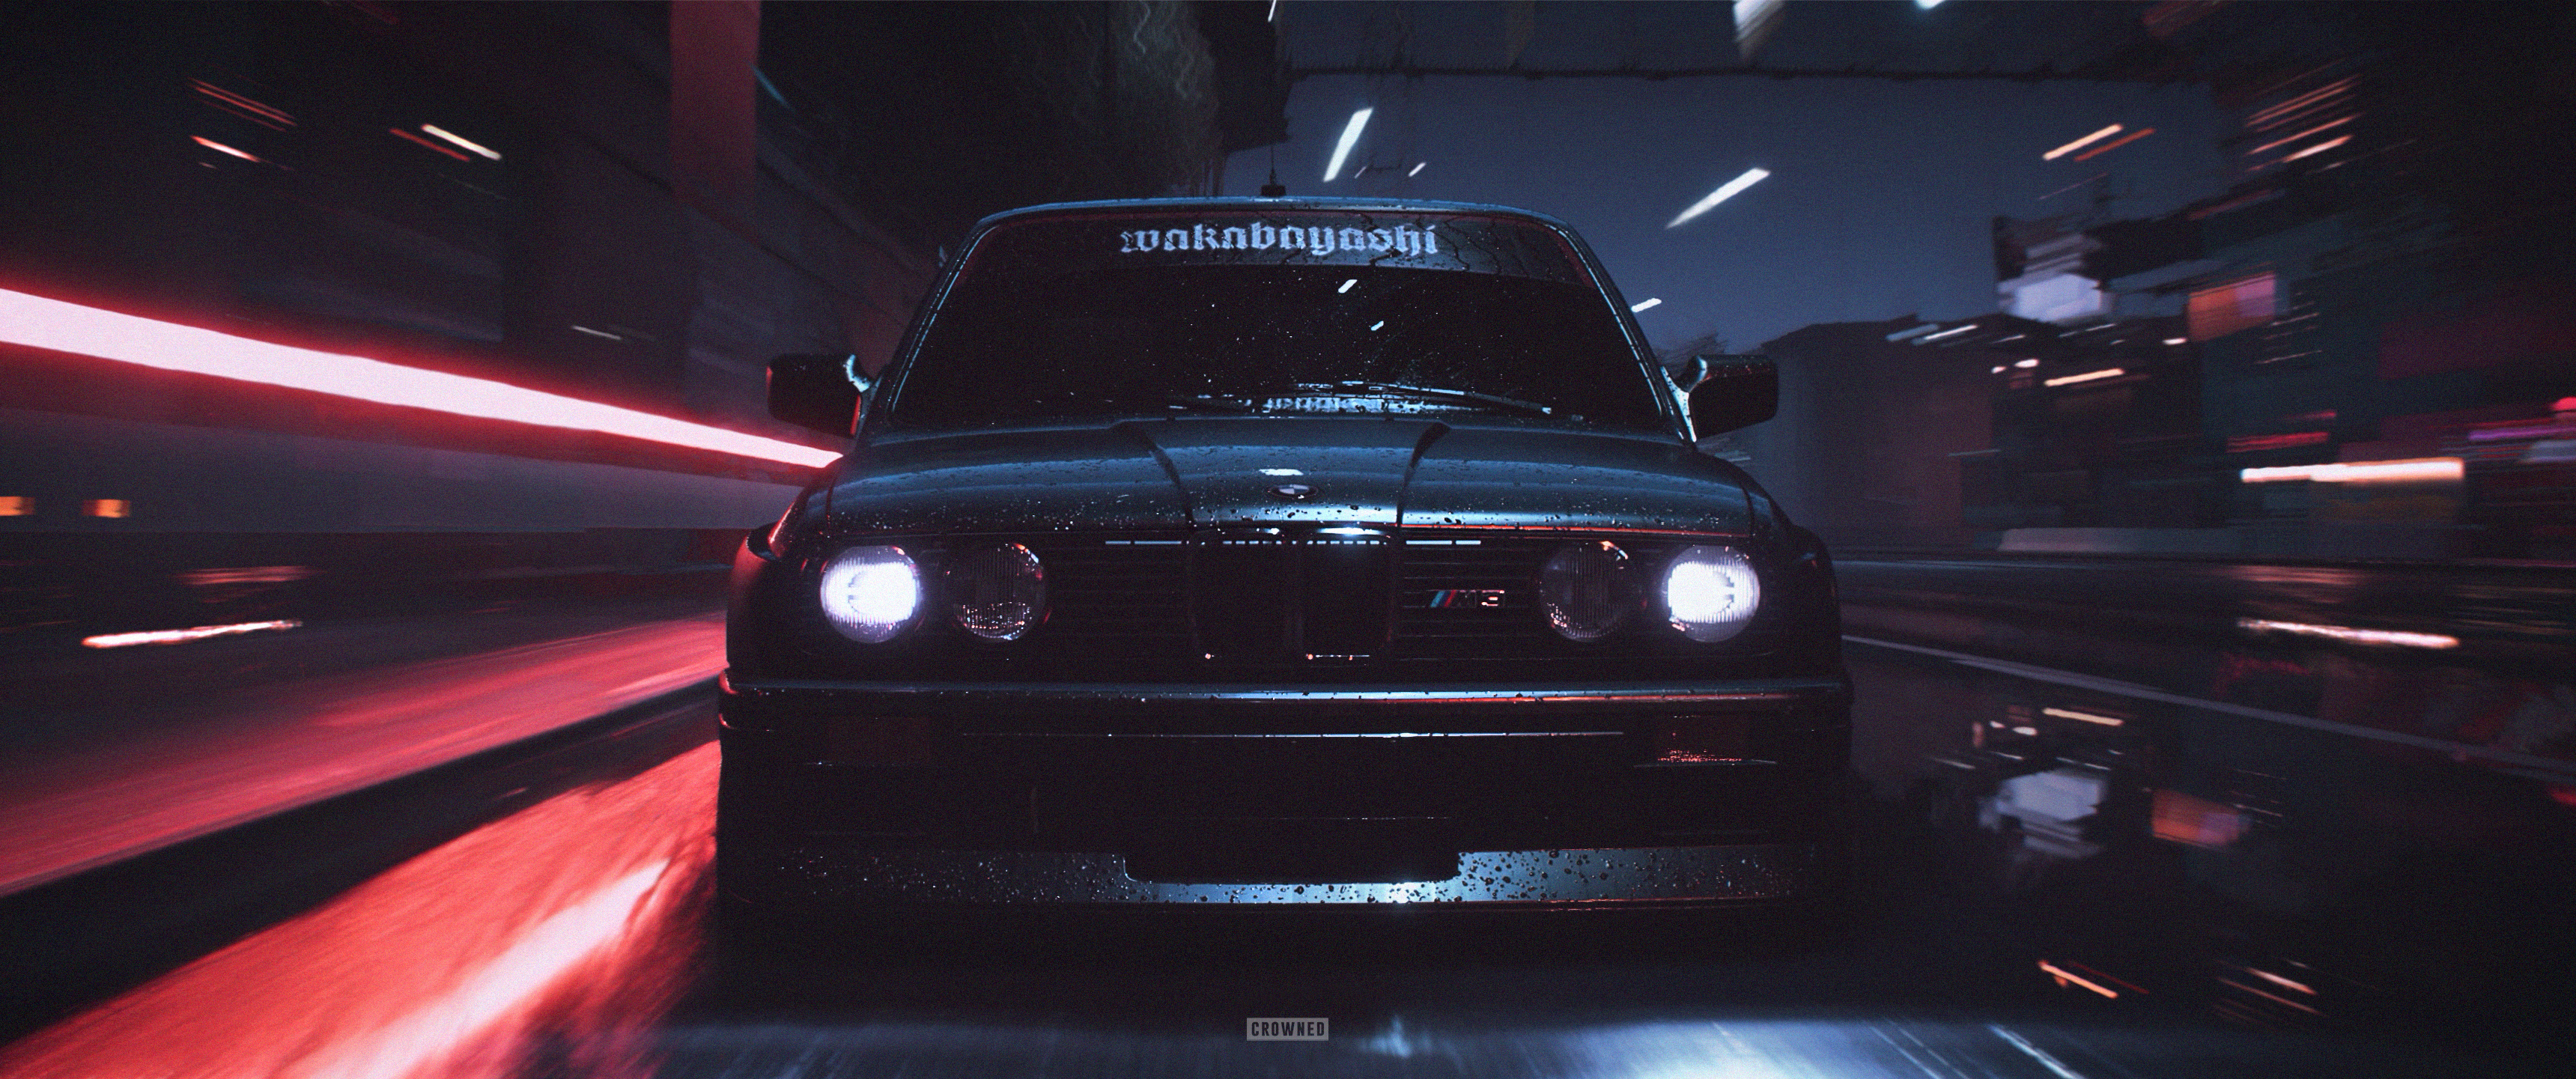 CROWNED, Need for Speed, BMW M3, Car, BMW M3 E30 Wallpaper